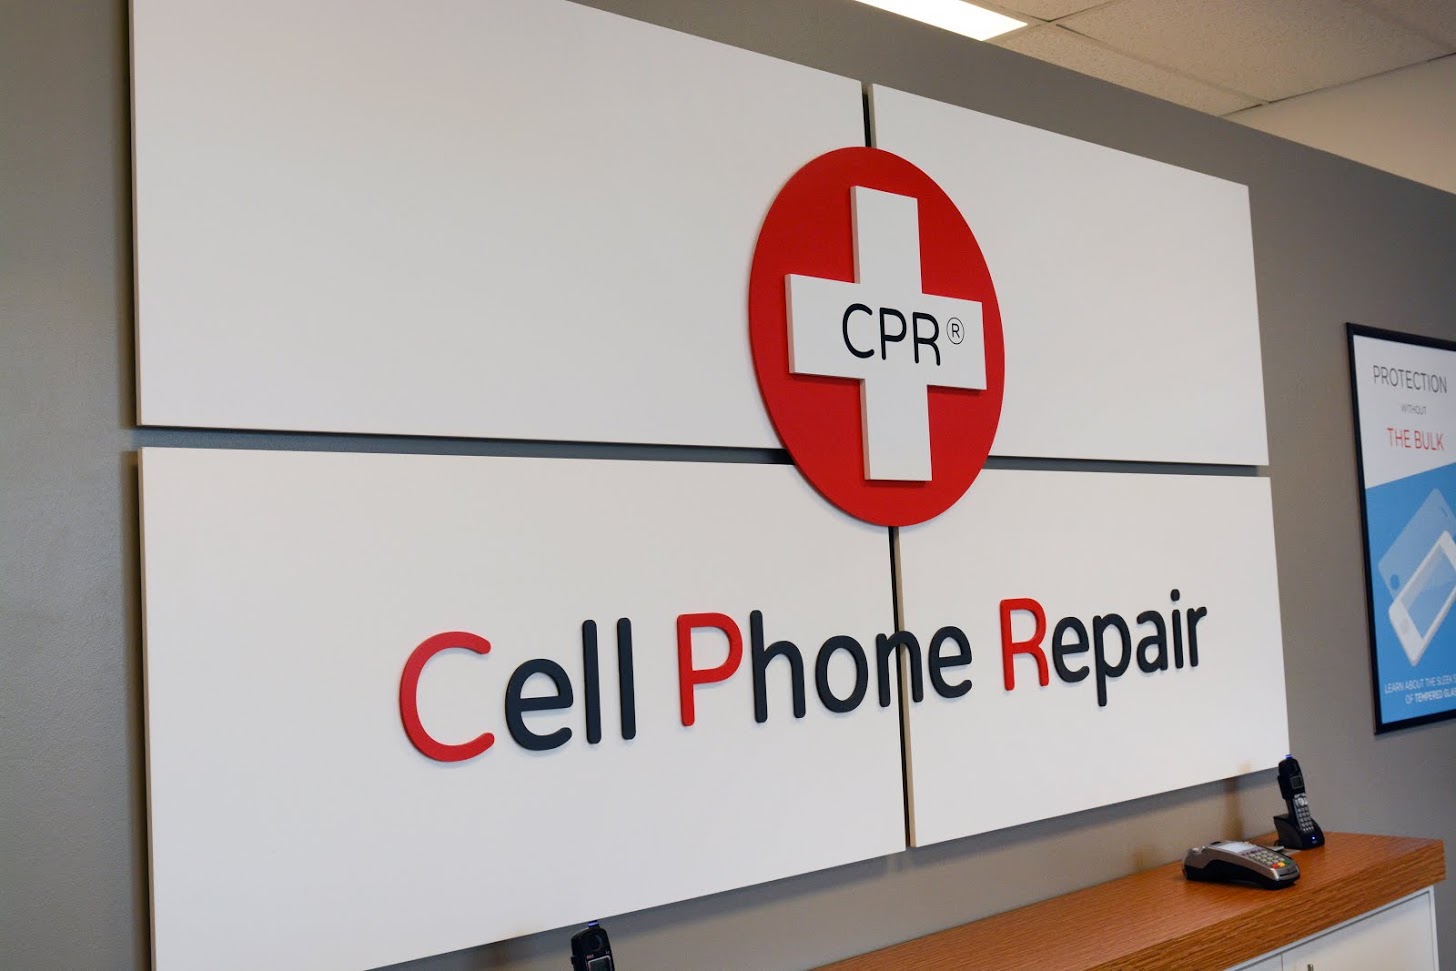 CPR Cell Phone Repair, Tuesday, January 21, 2020, Press release picture